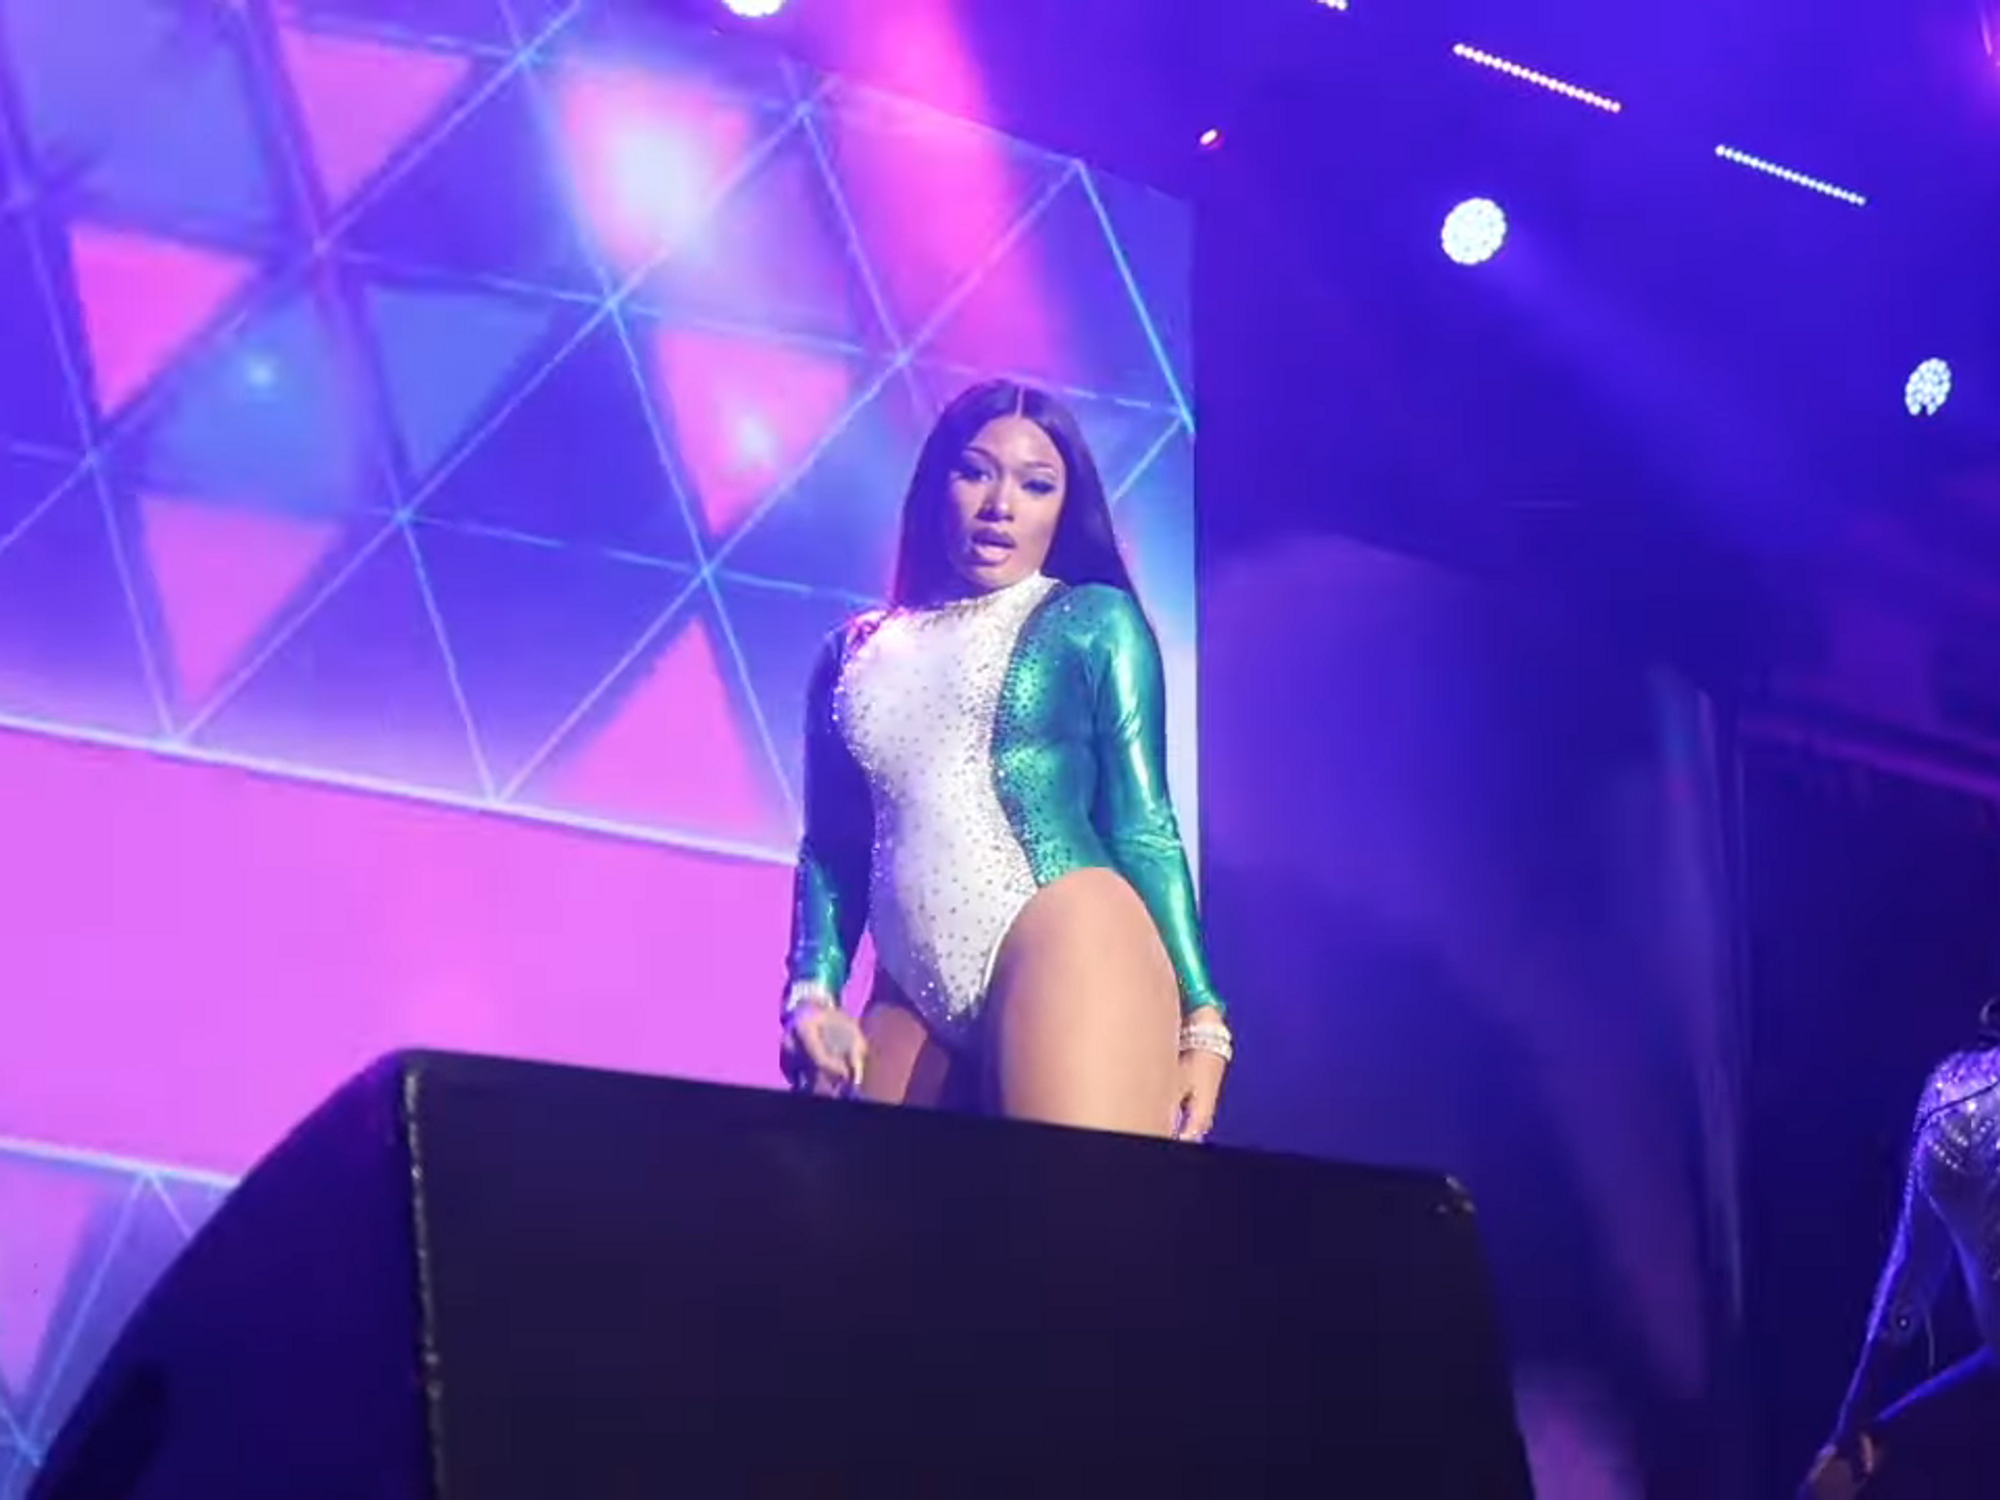 ​Megan Thee Stallion performing on stage in a blue and white leotard.